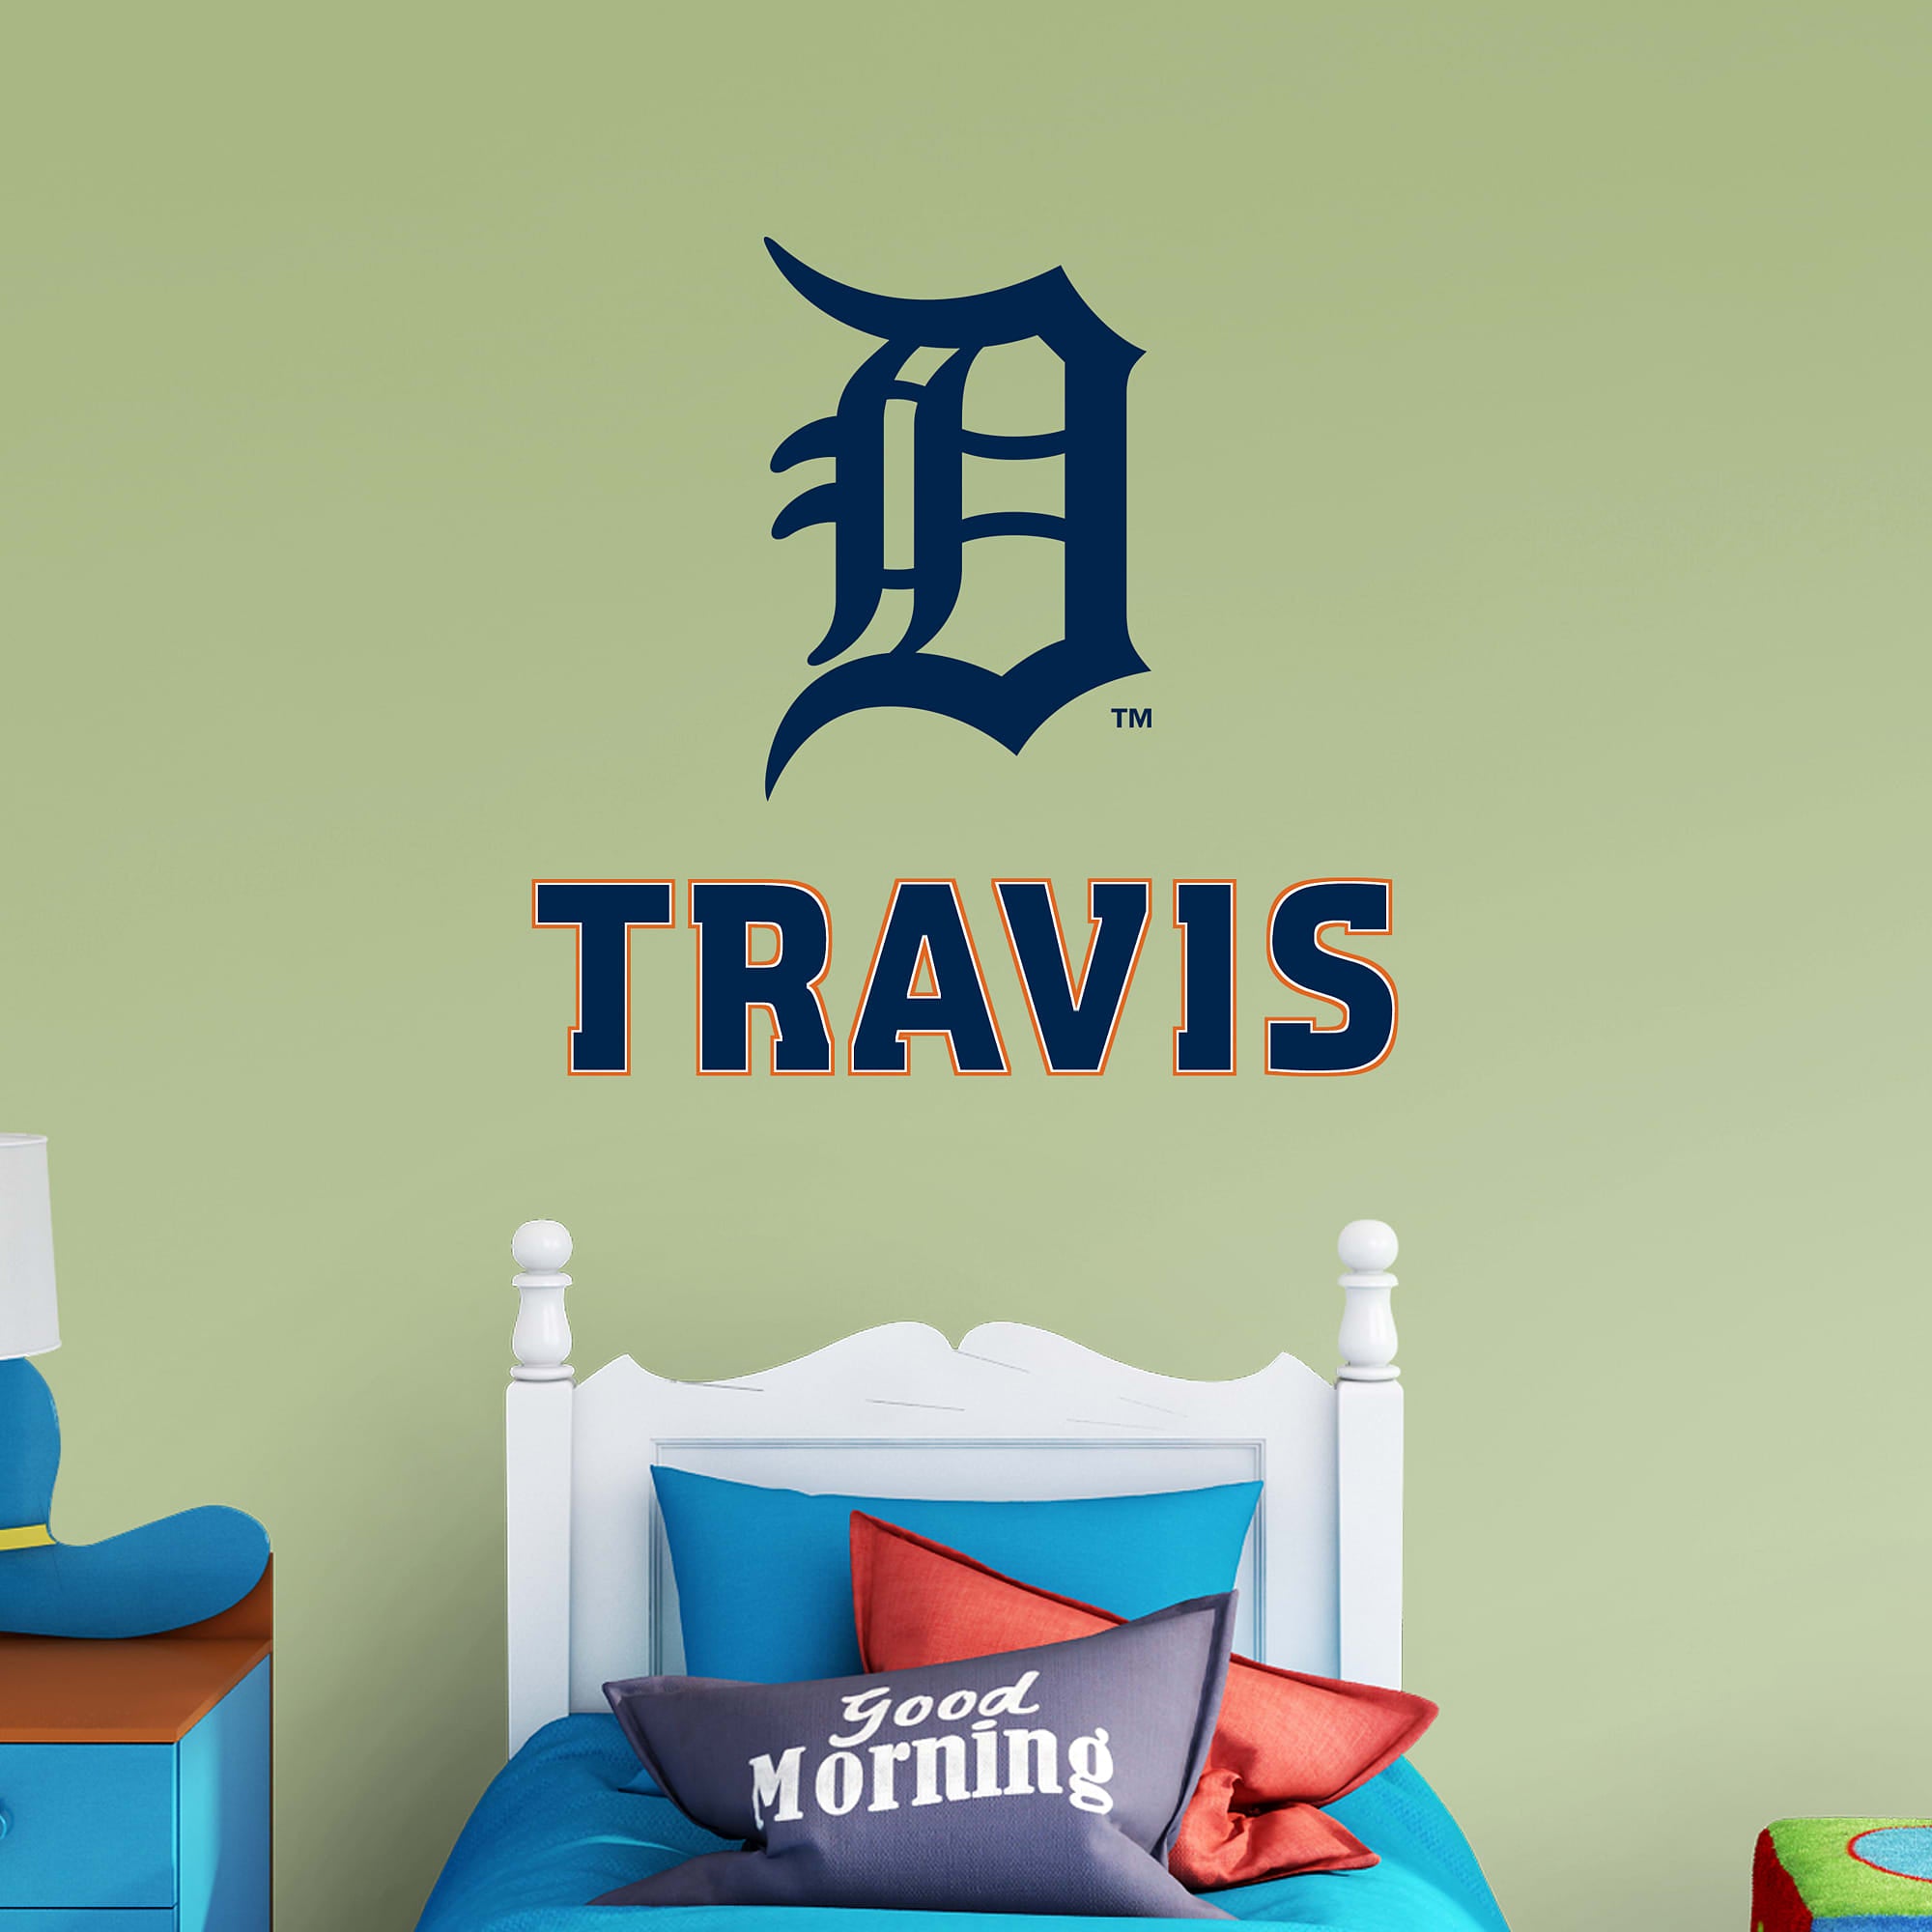 Detroit Tigers: Old English "D" Stacked Personalized Name - Officially Licensed MLB Transfer Decal in Navy (52"W x 39.5"H) by Fa